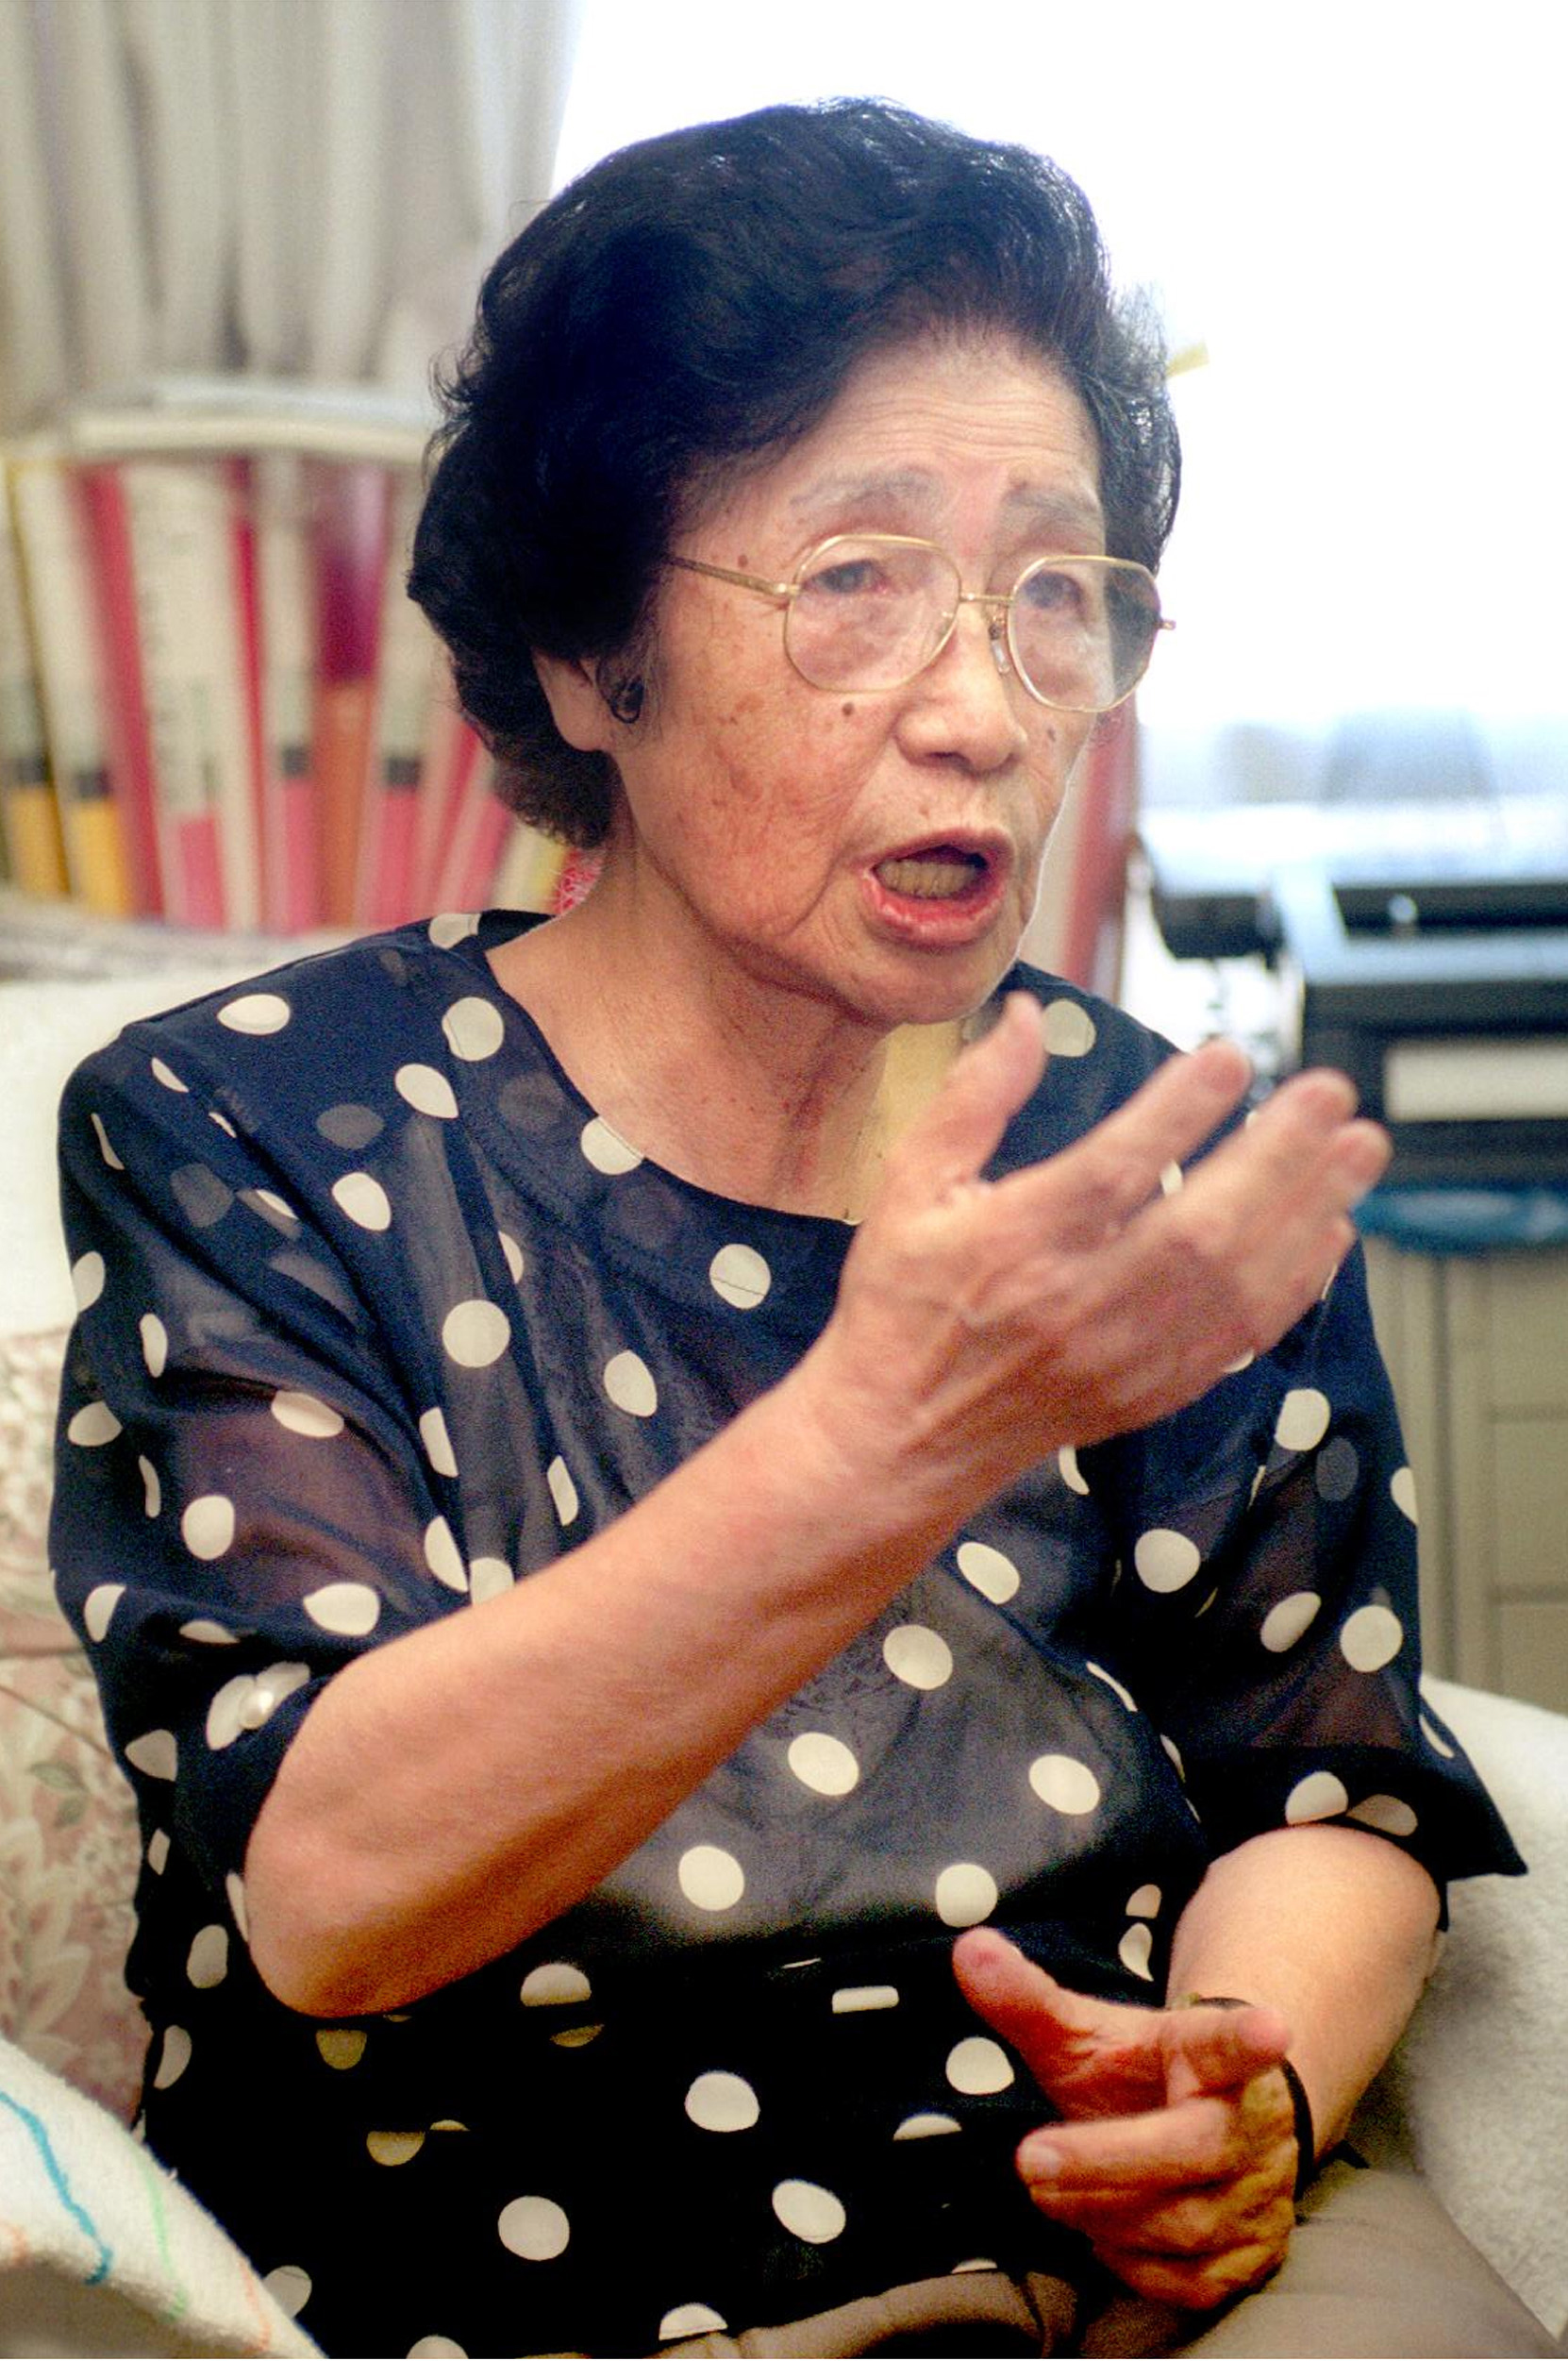 Geochemist Katsuko Saruhashi speaks during an interview on August 23, 1999 in Japan. (Sankei Archive/Getty Images)